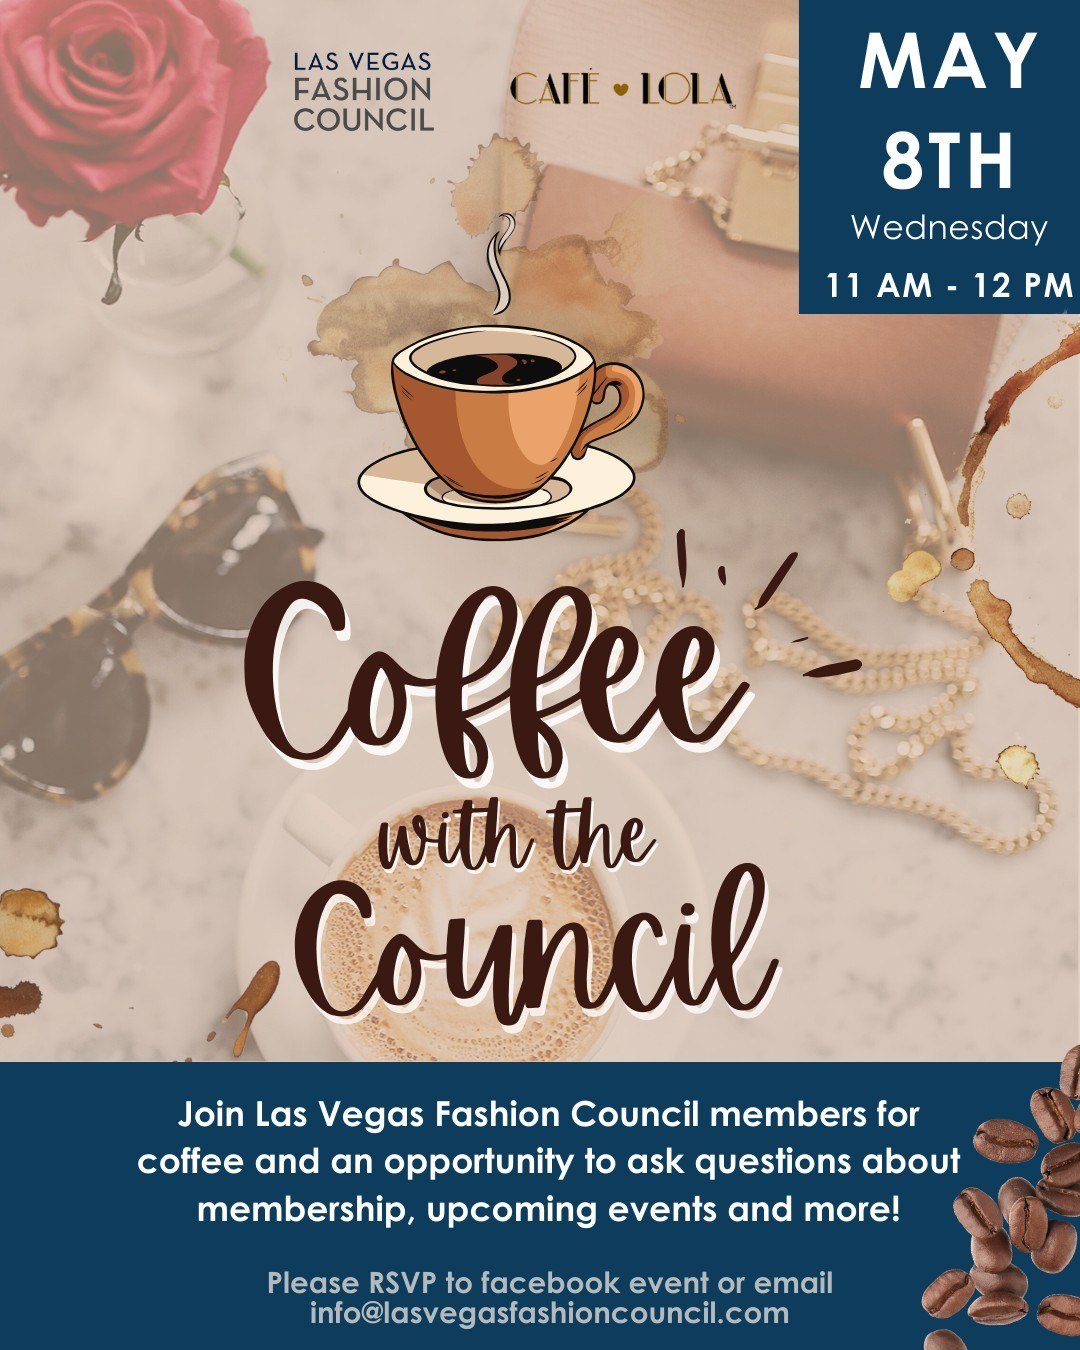 🗣️ Calling all fashion enthusiasts! Please join us at the next Coffee with the Council coming up on Wednesday, May 8th from 11 AM - 12 PM ☕️ Learn how you can get more involved with LVFC, and all the events we have planned for this year 😁

🔗 RSVP 